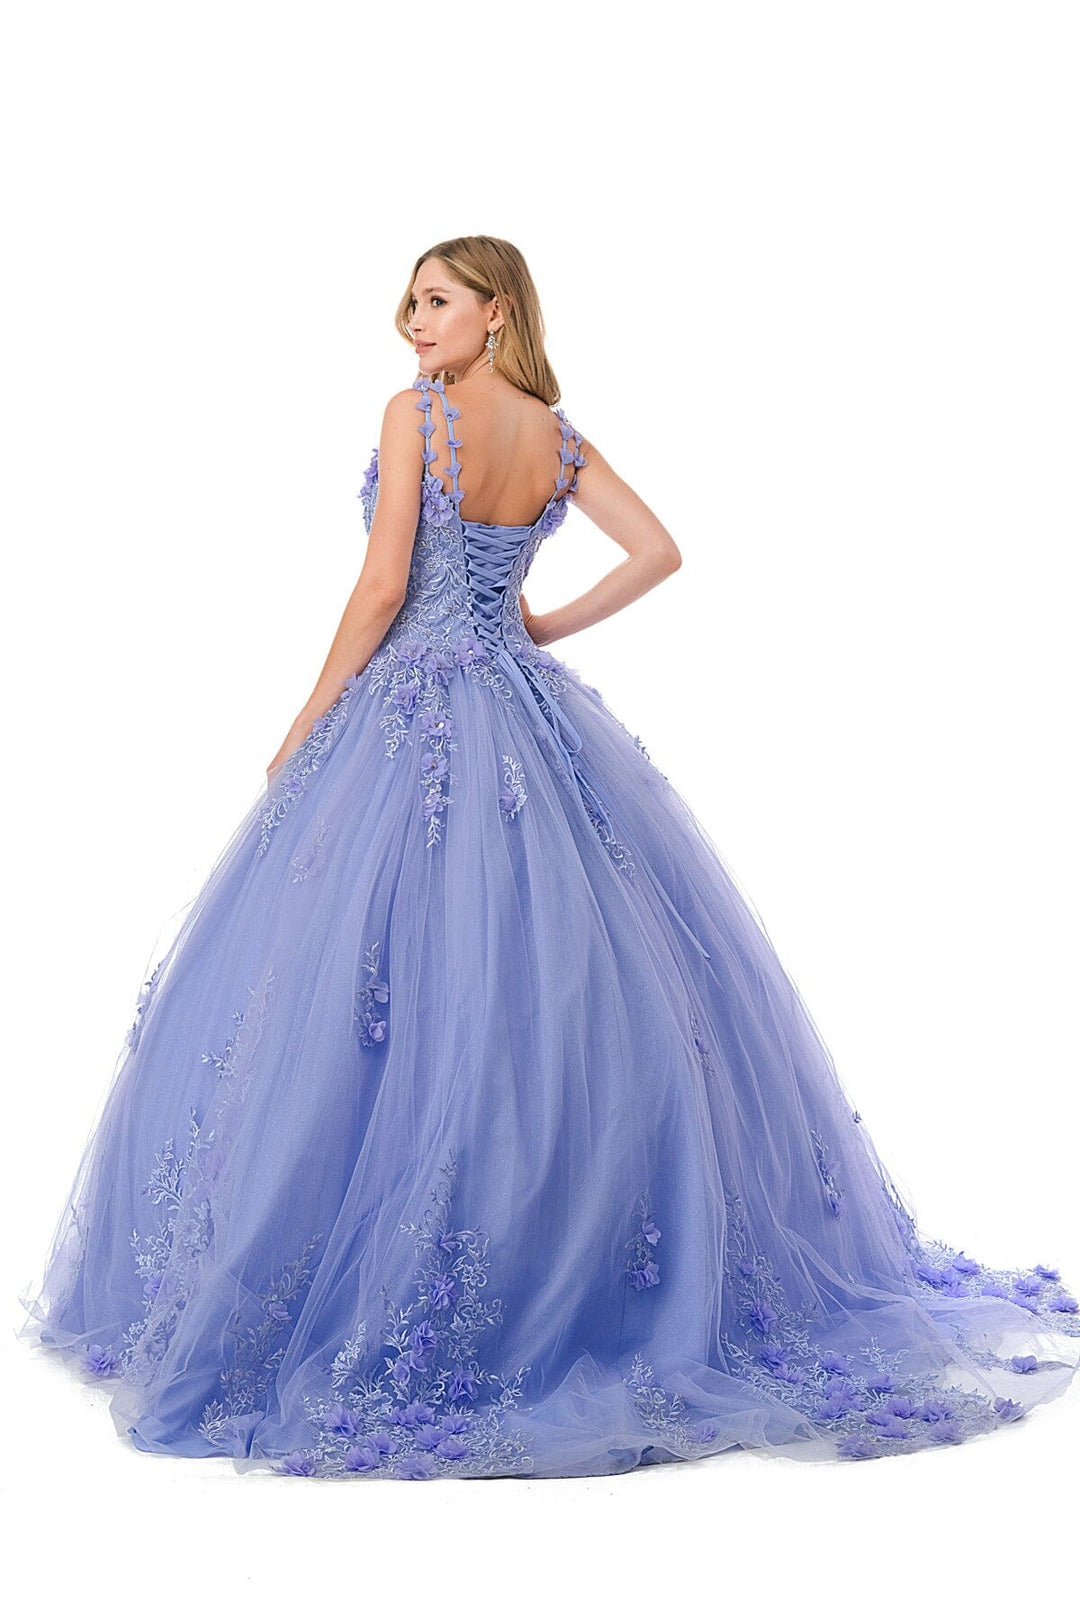 3D Floral Sleeveless Tulle Ball Gown by Coya L2729